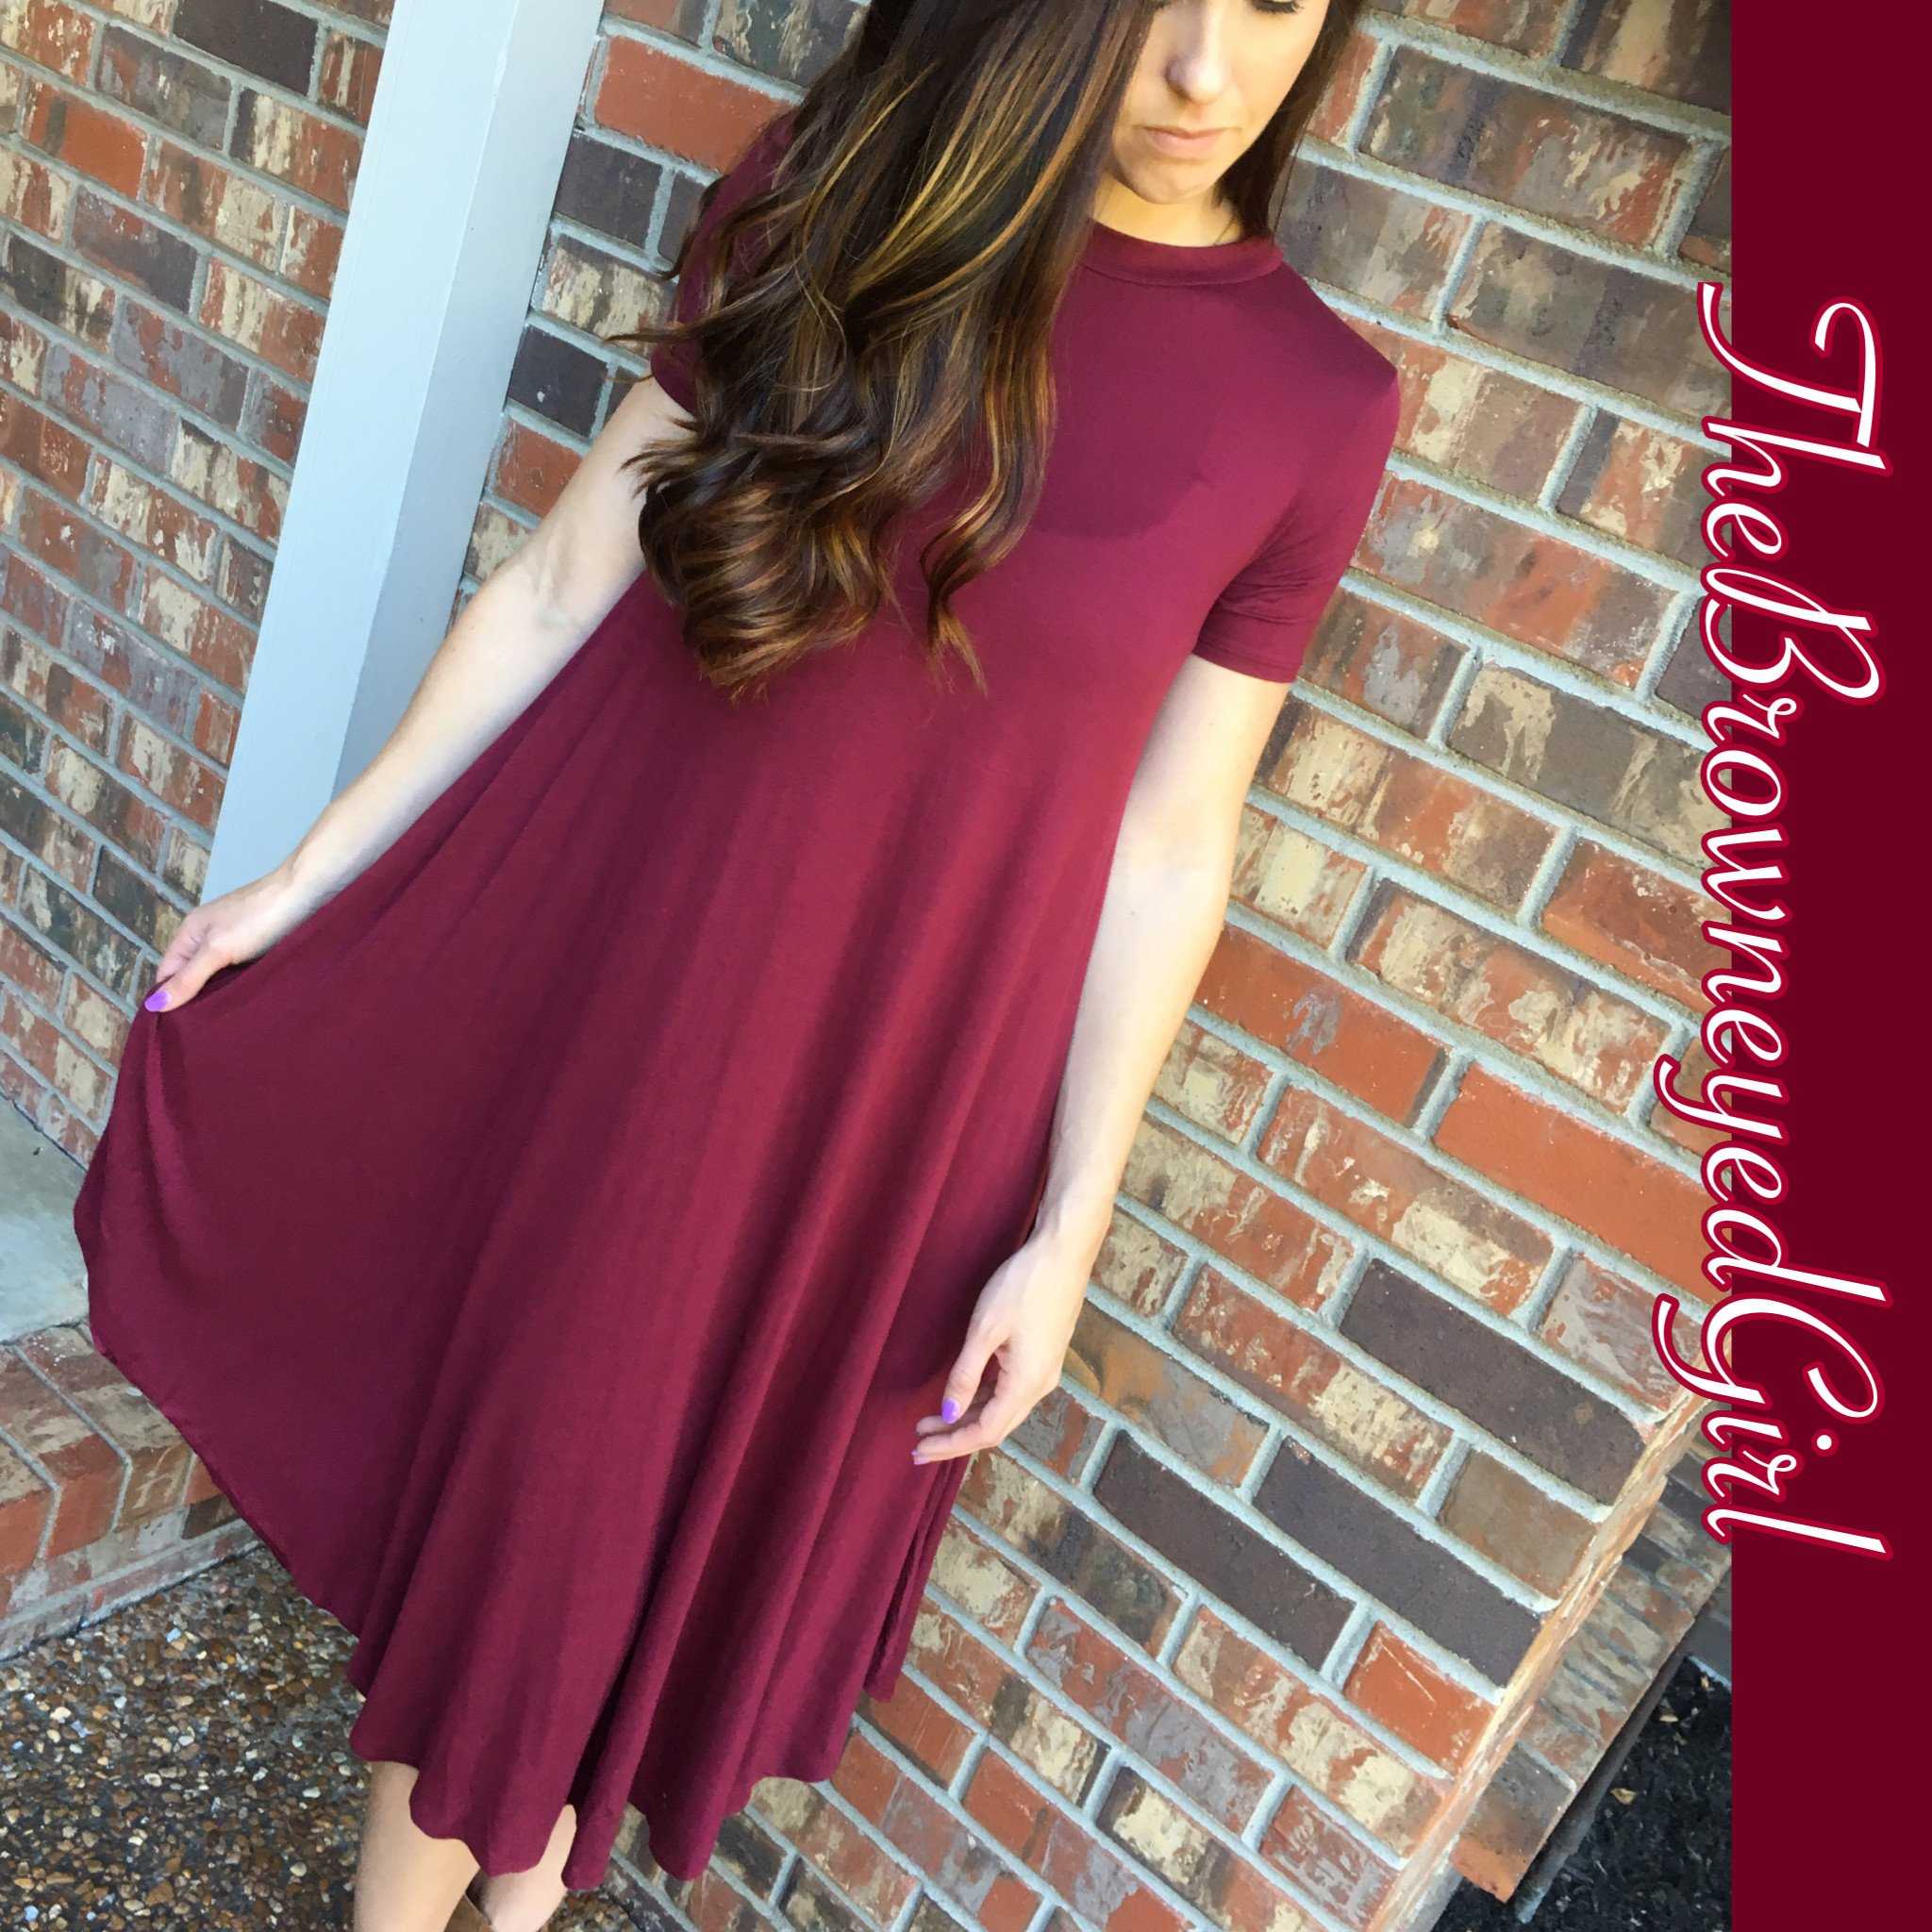 The Time of your Life Middi Burgundy - TheBrownEyedGirl Boutique